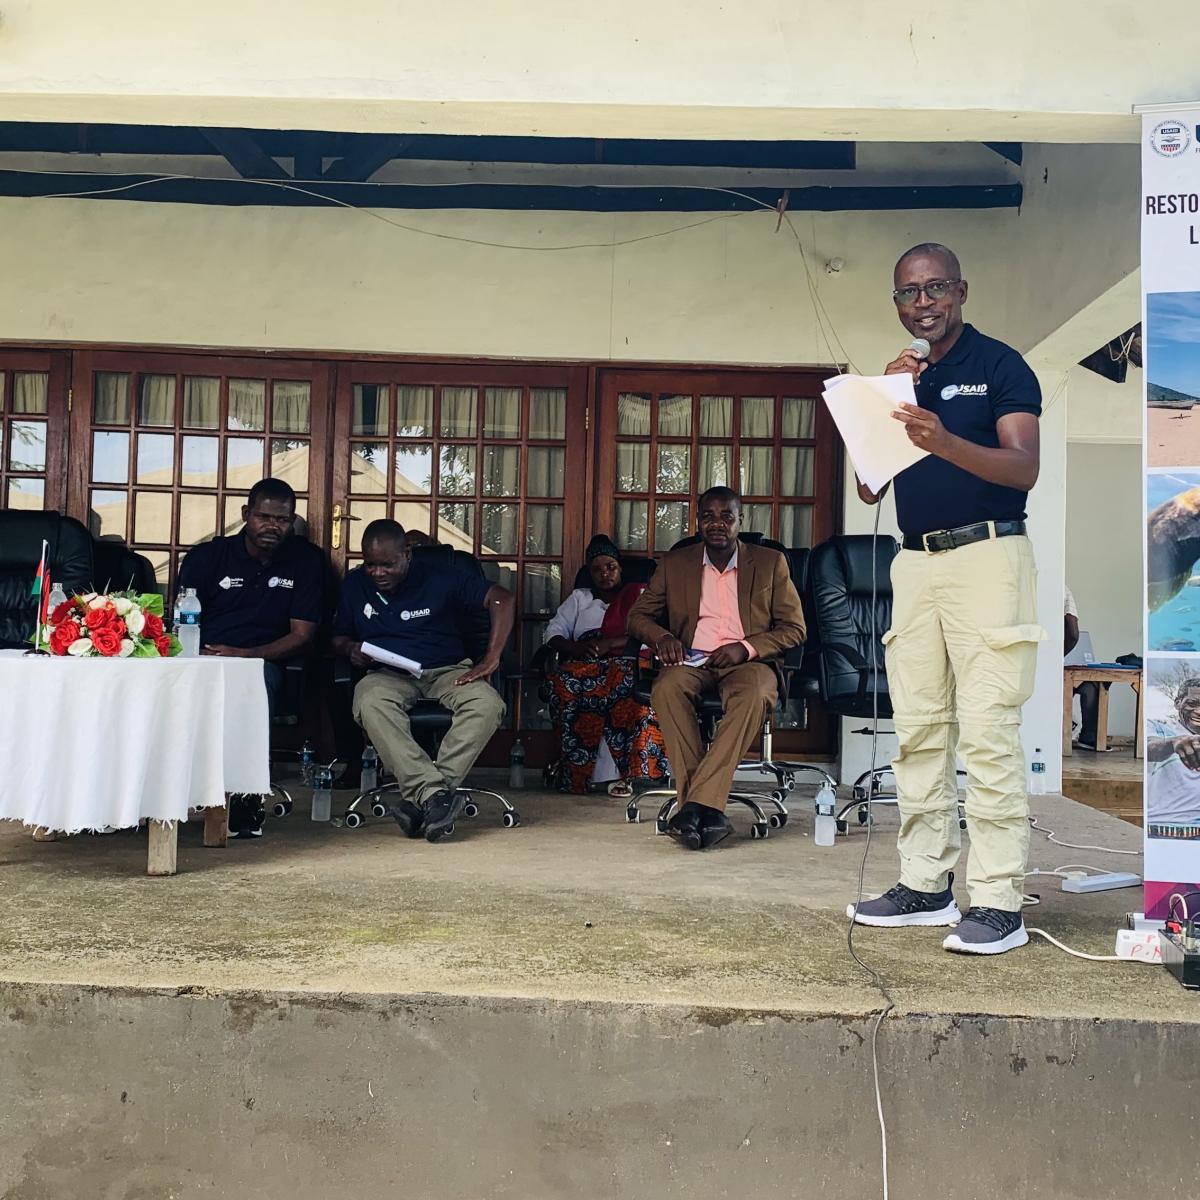 USAID Malawi Climate Change Specialist Bruce Sosola standing on an elevated area and giving remarks during the handover ceremony of an electronic catch assessment survey (eCAS) system and refurbished boats to the Government of Malawi.